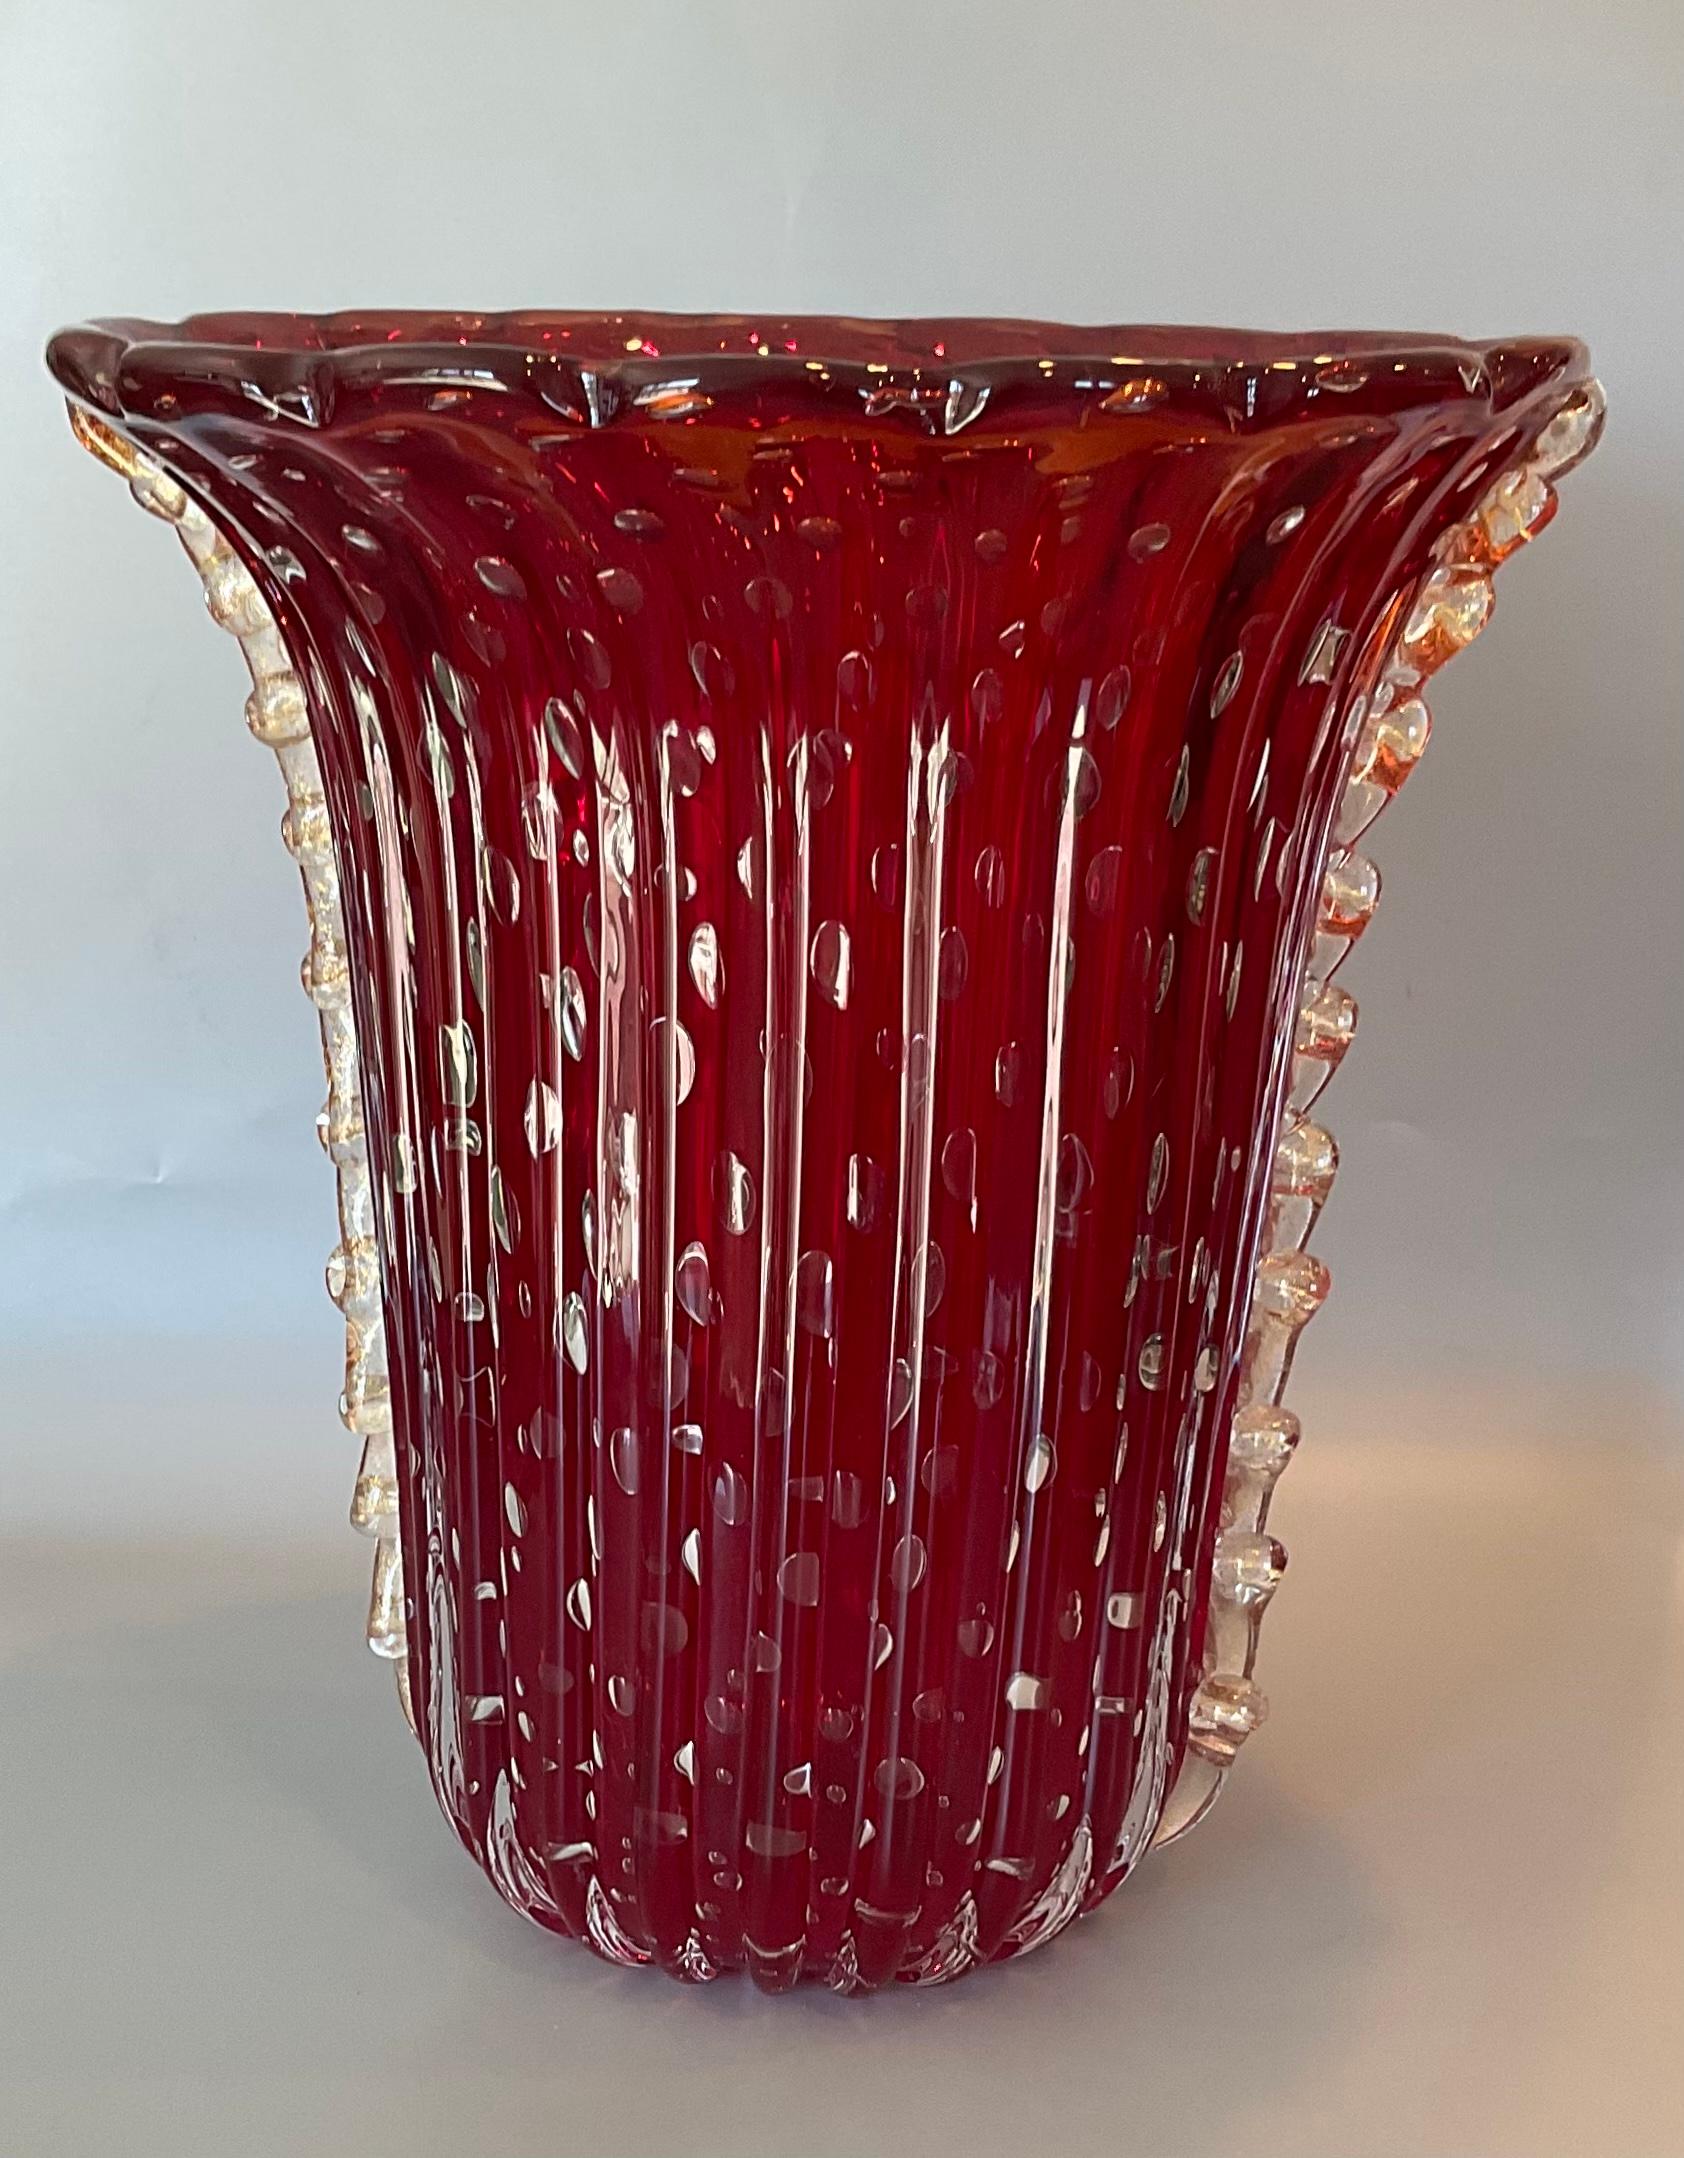 Large Vibrant red barovier Style Murano Art glass Vase with controlled bubbles And applied gold handles.